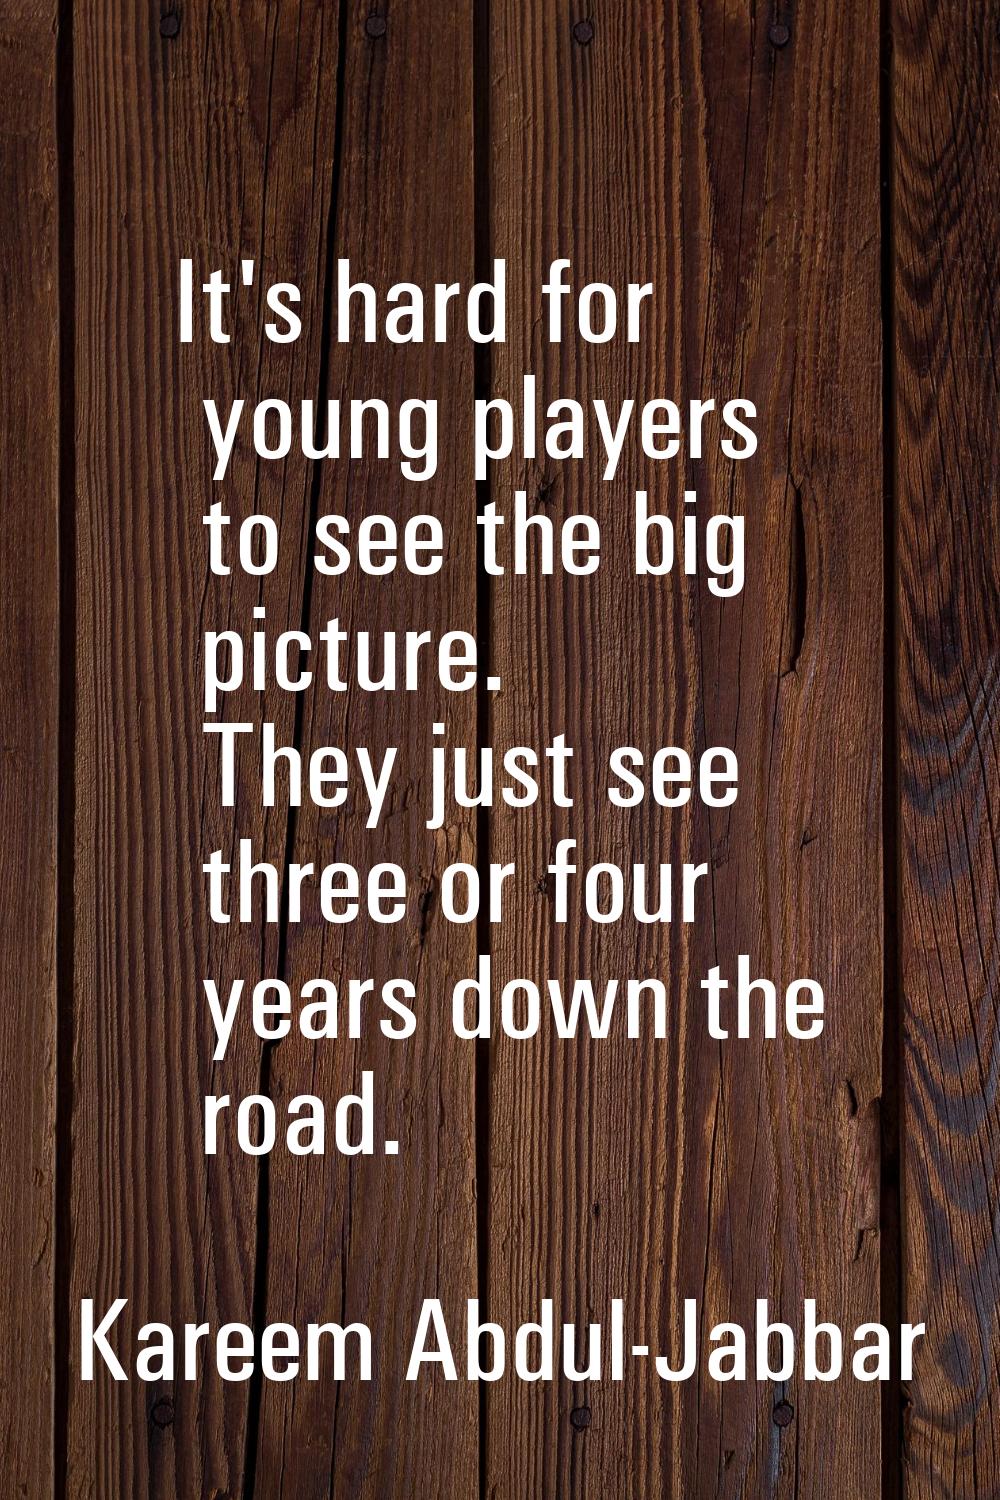 It's hard for young players to see the big picture. They just see three or four years down the road